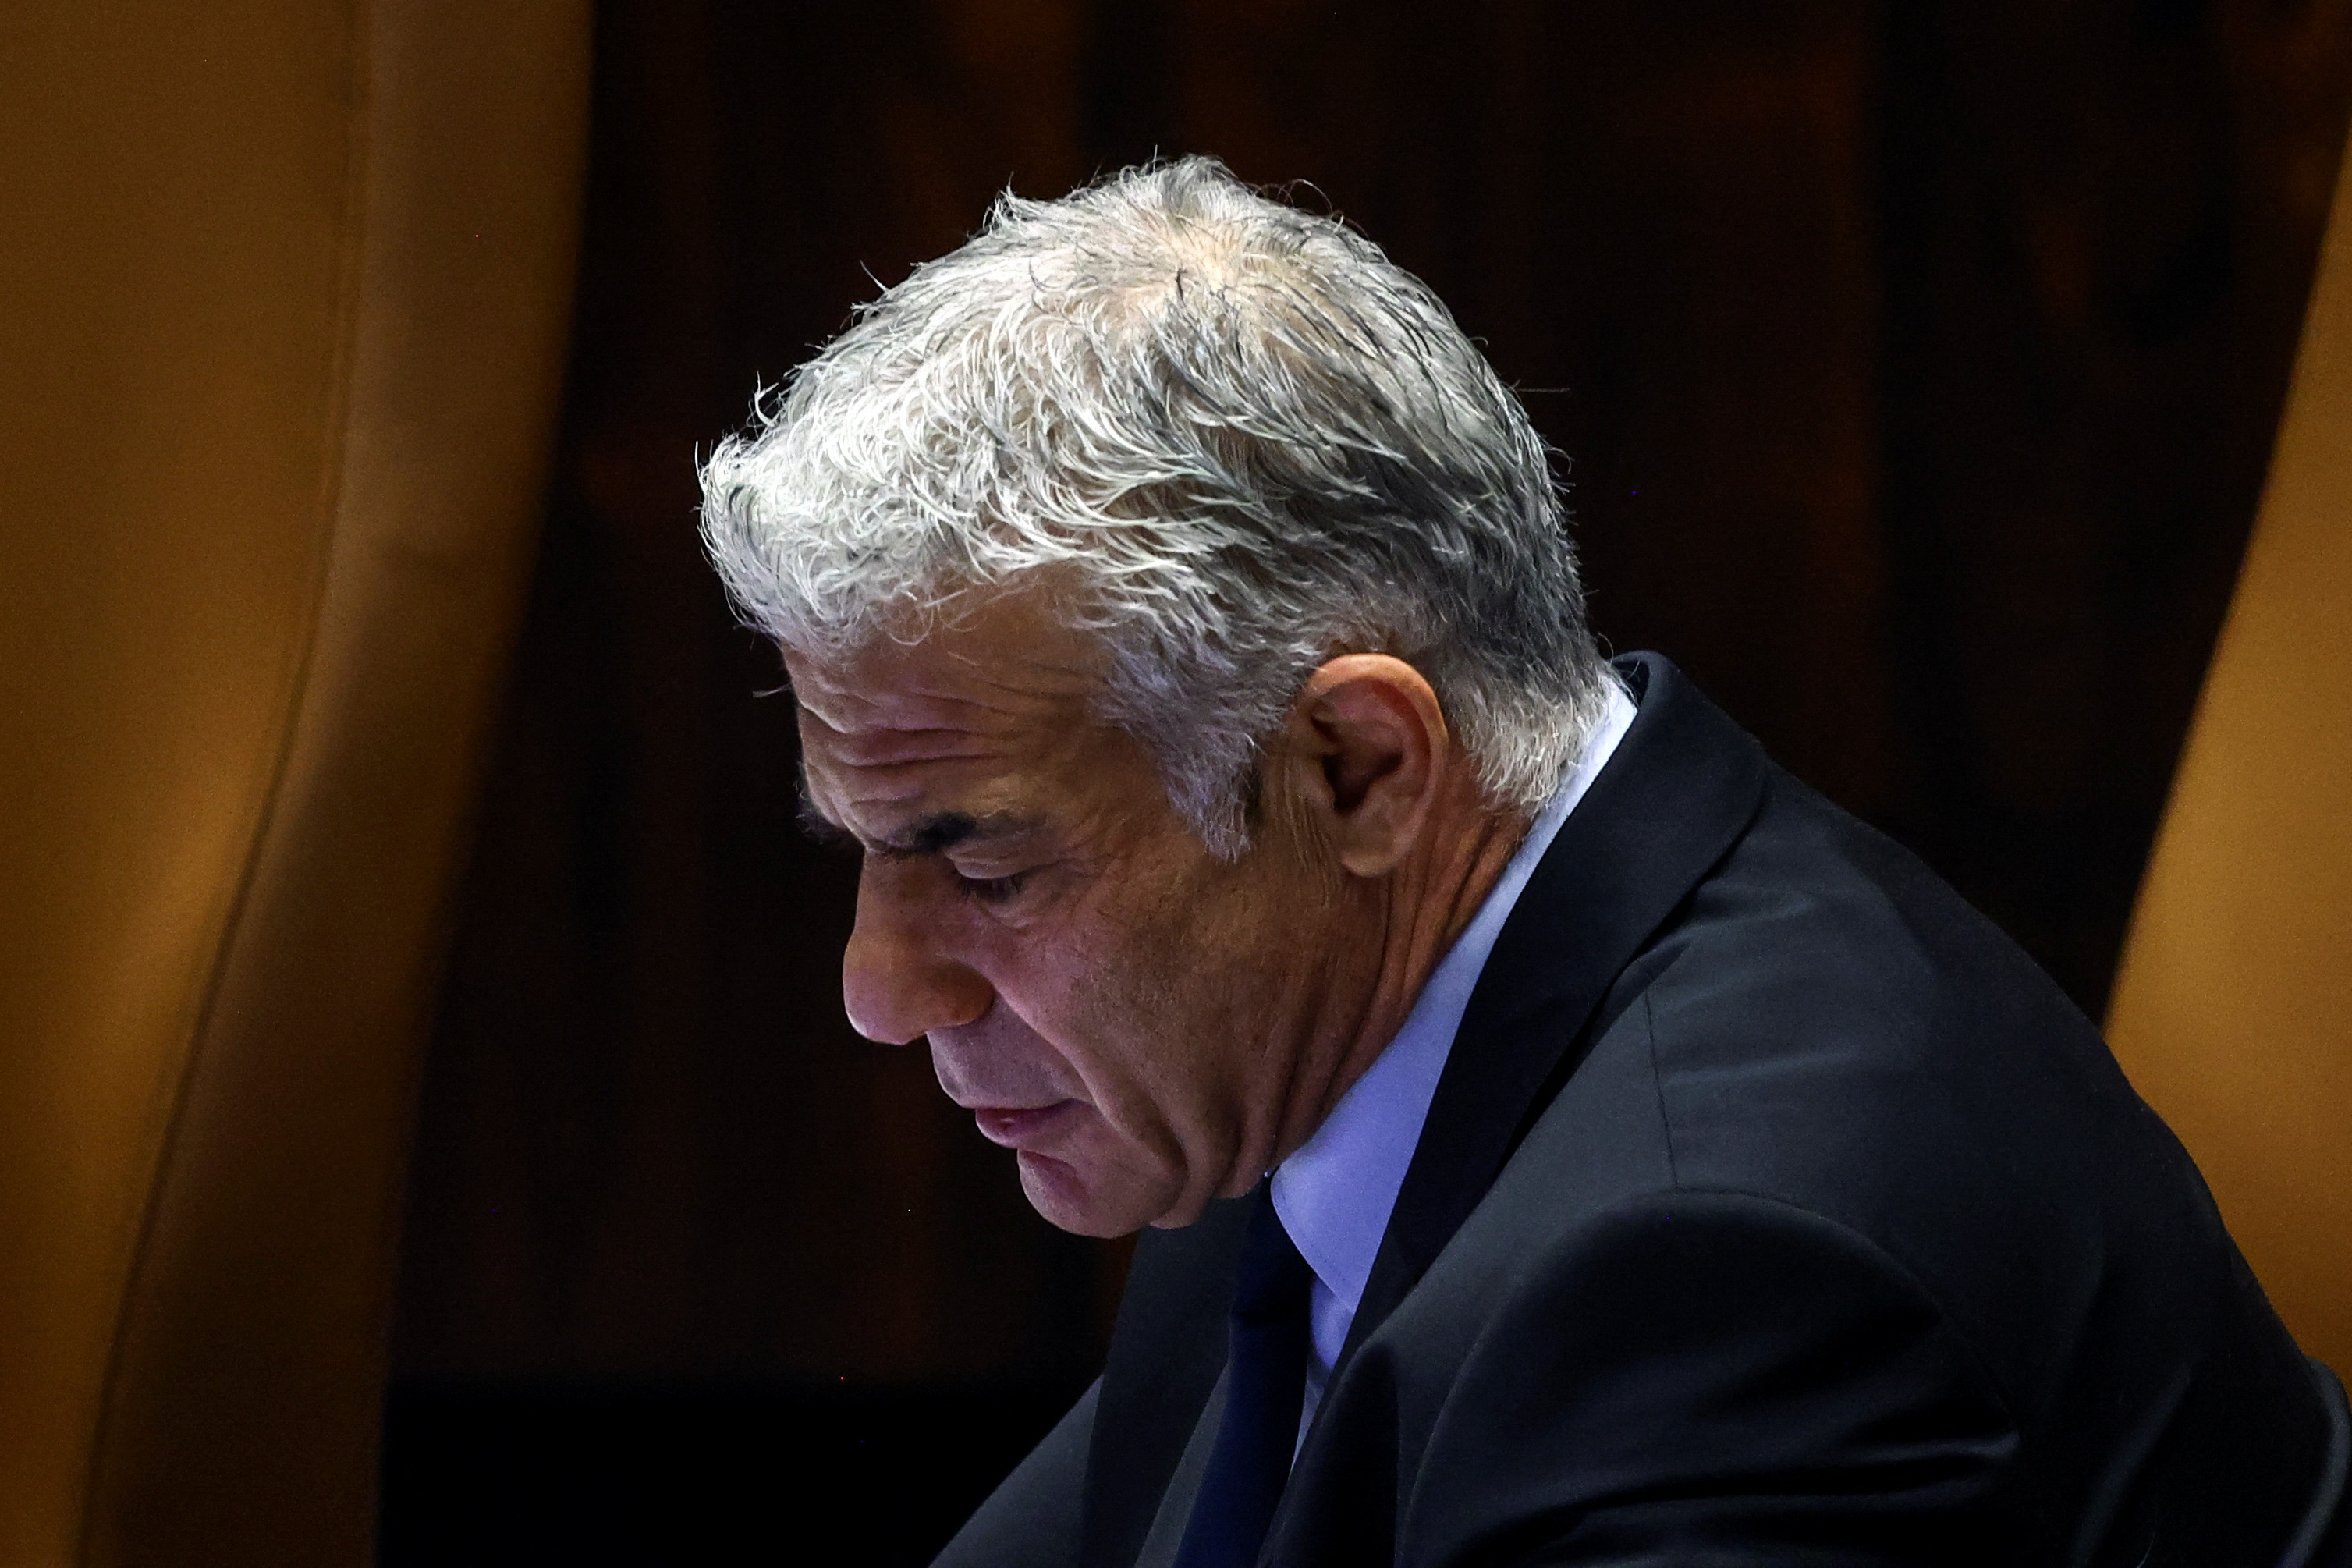 Israeli Foreign Minister Lapid attends Knesset session in Jerusalem